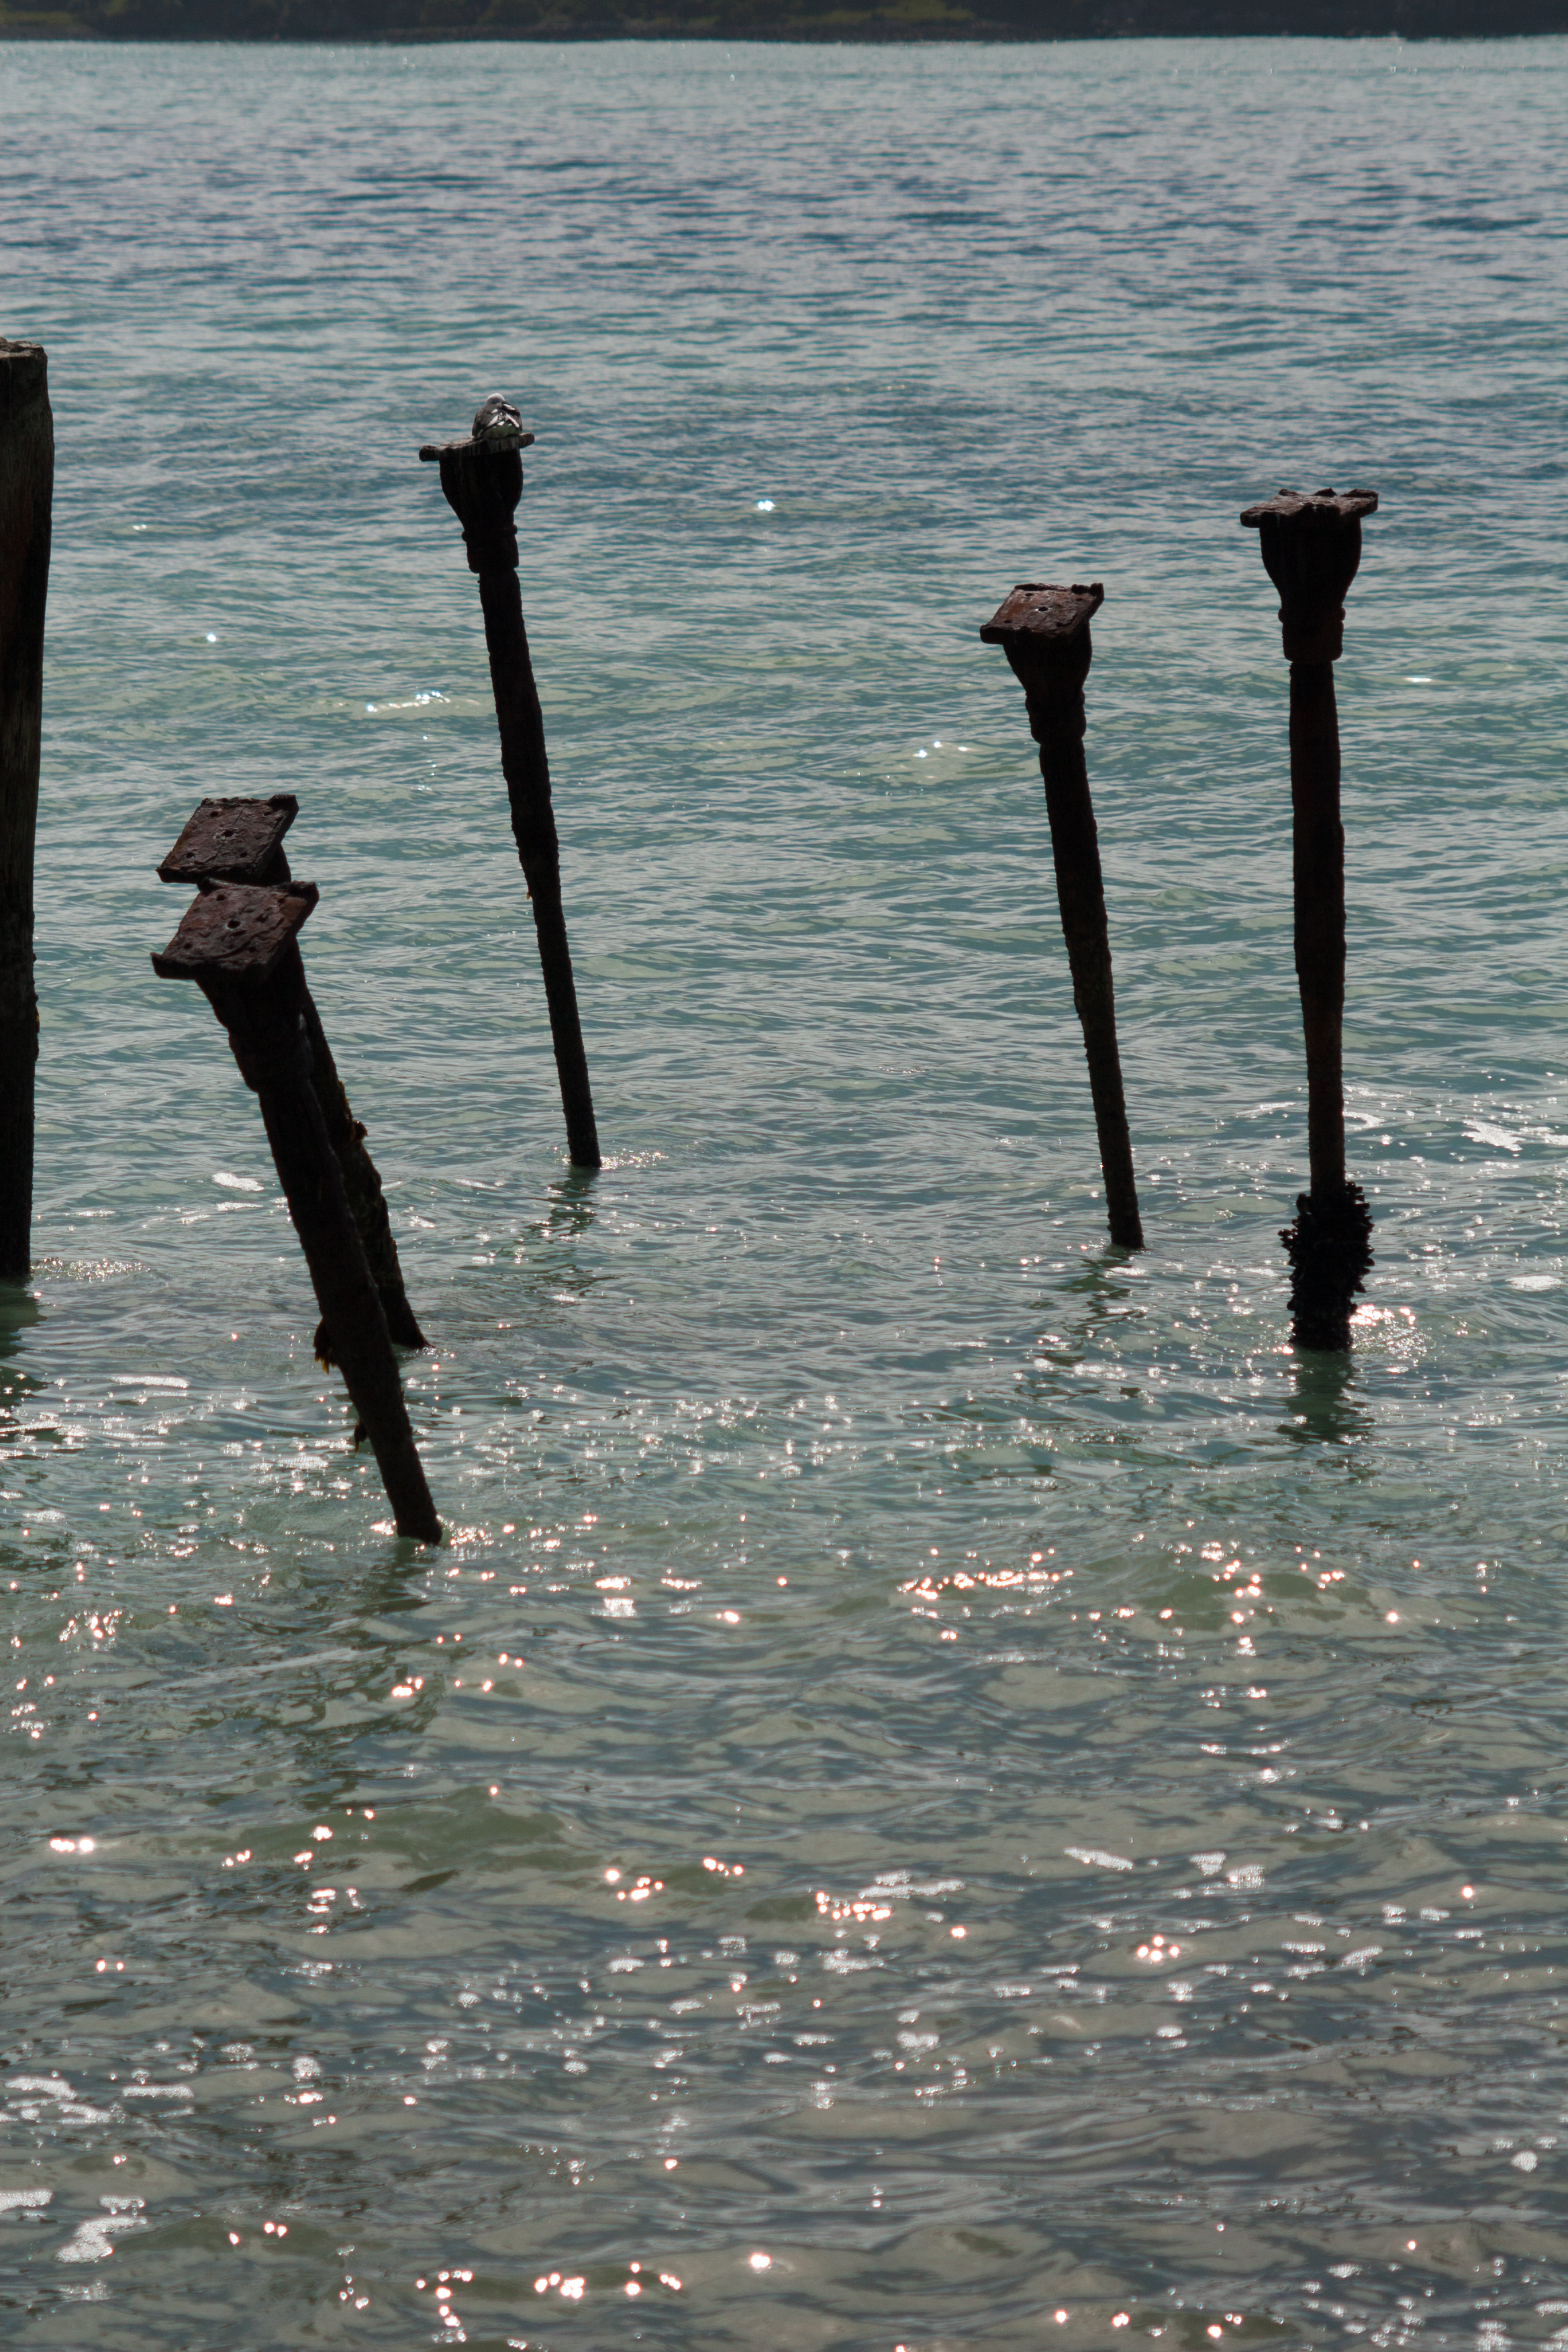 remains of an old wharf or pier sticking out of the water looking like stilts